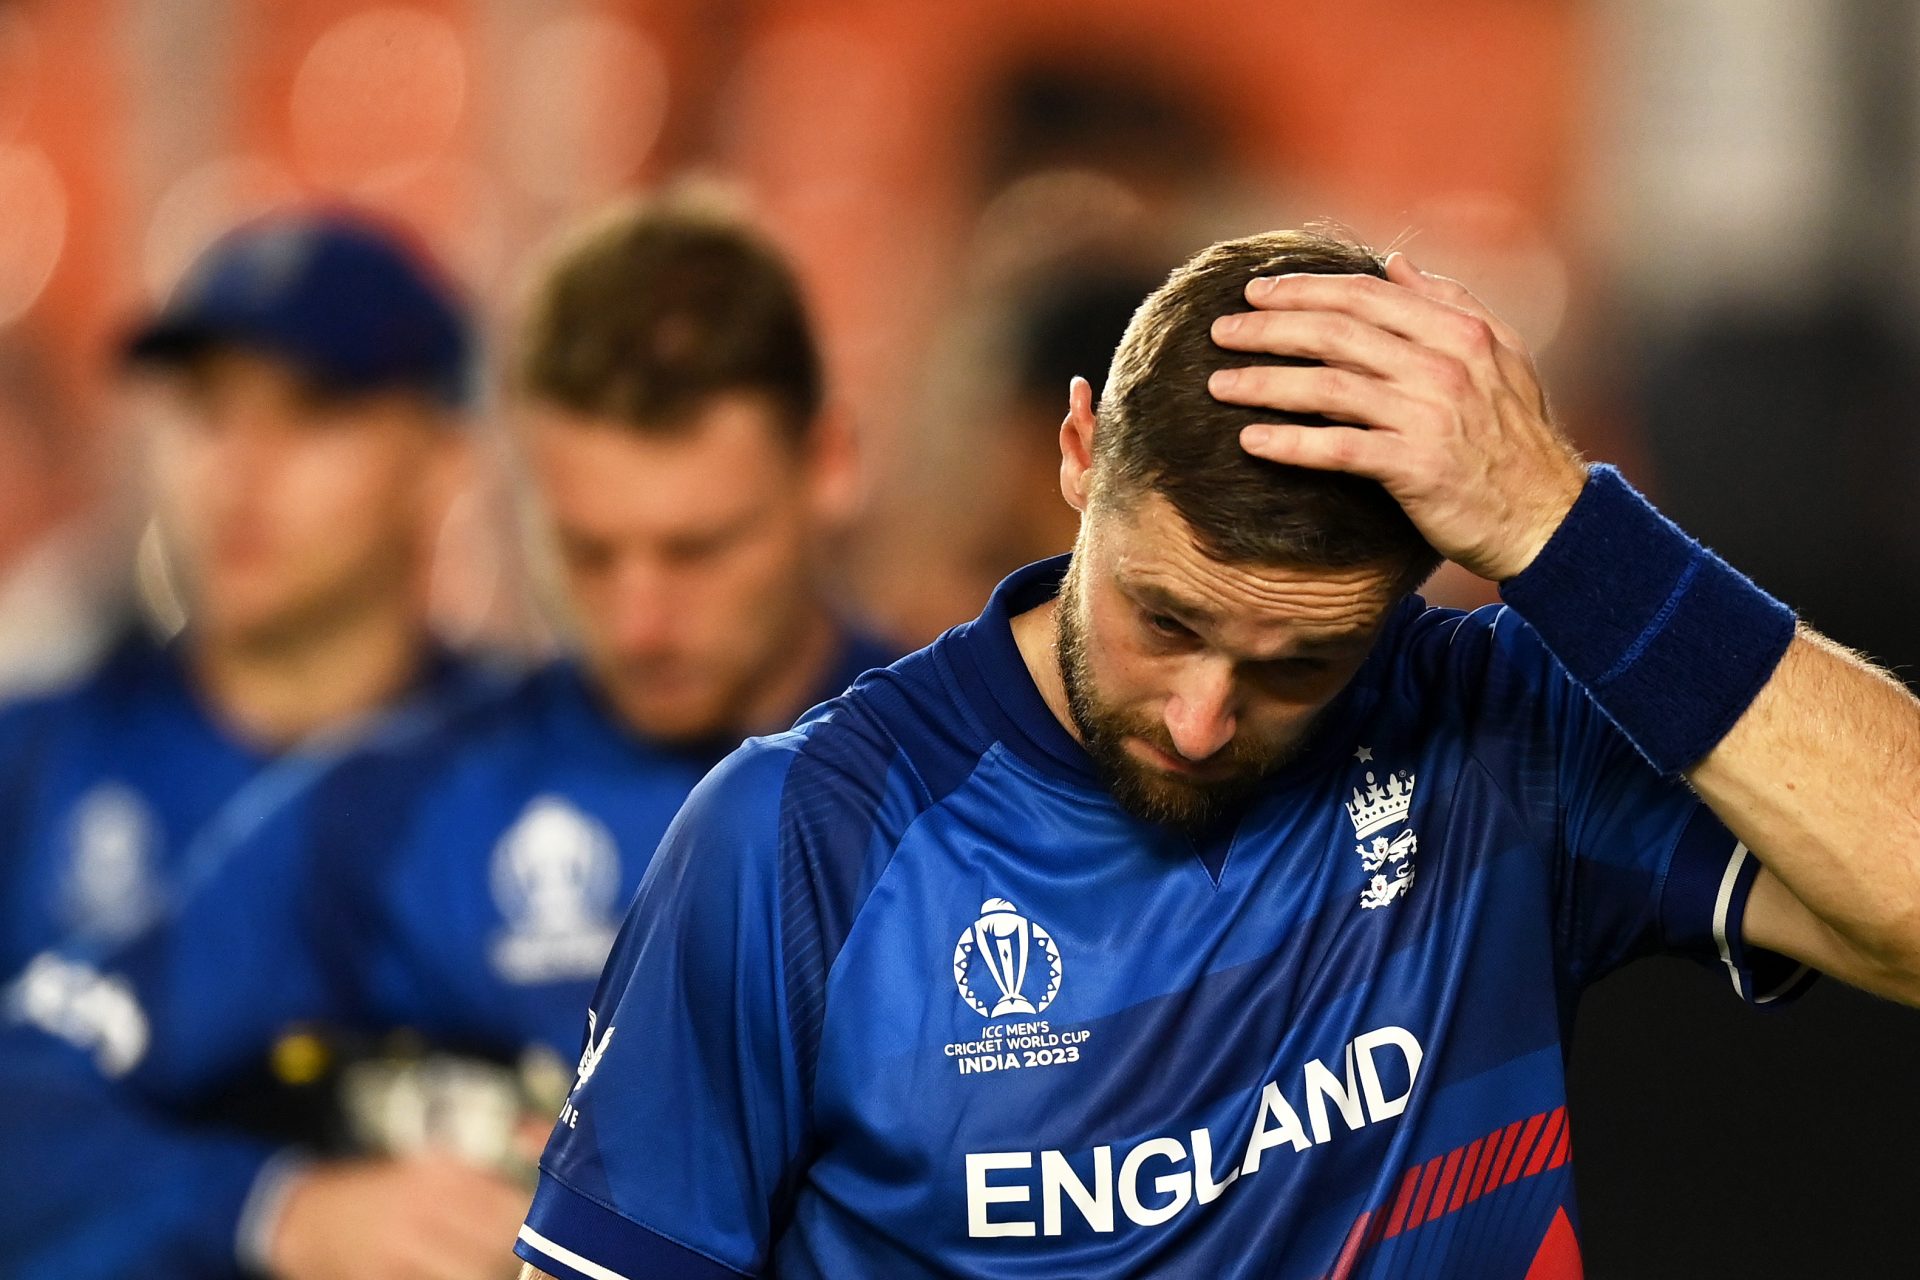 Upsets and downfalls, what’s going on in the Cricket World Cup?